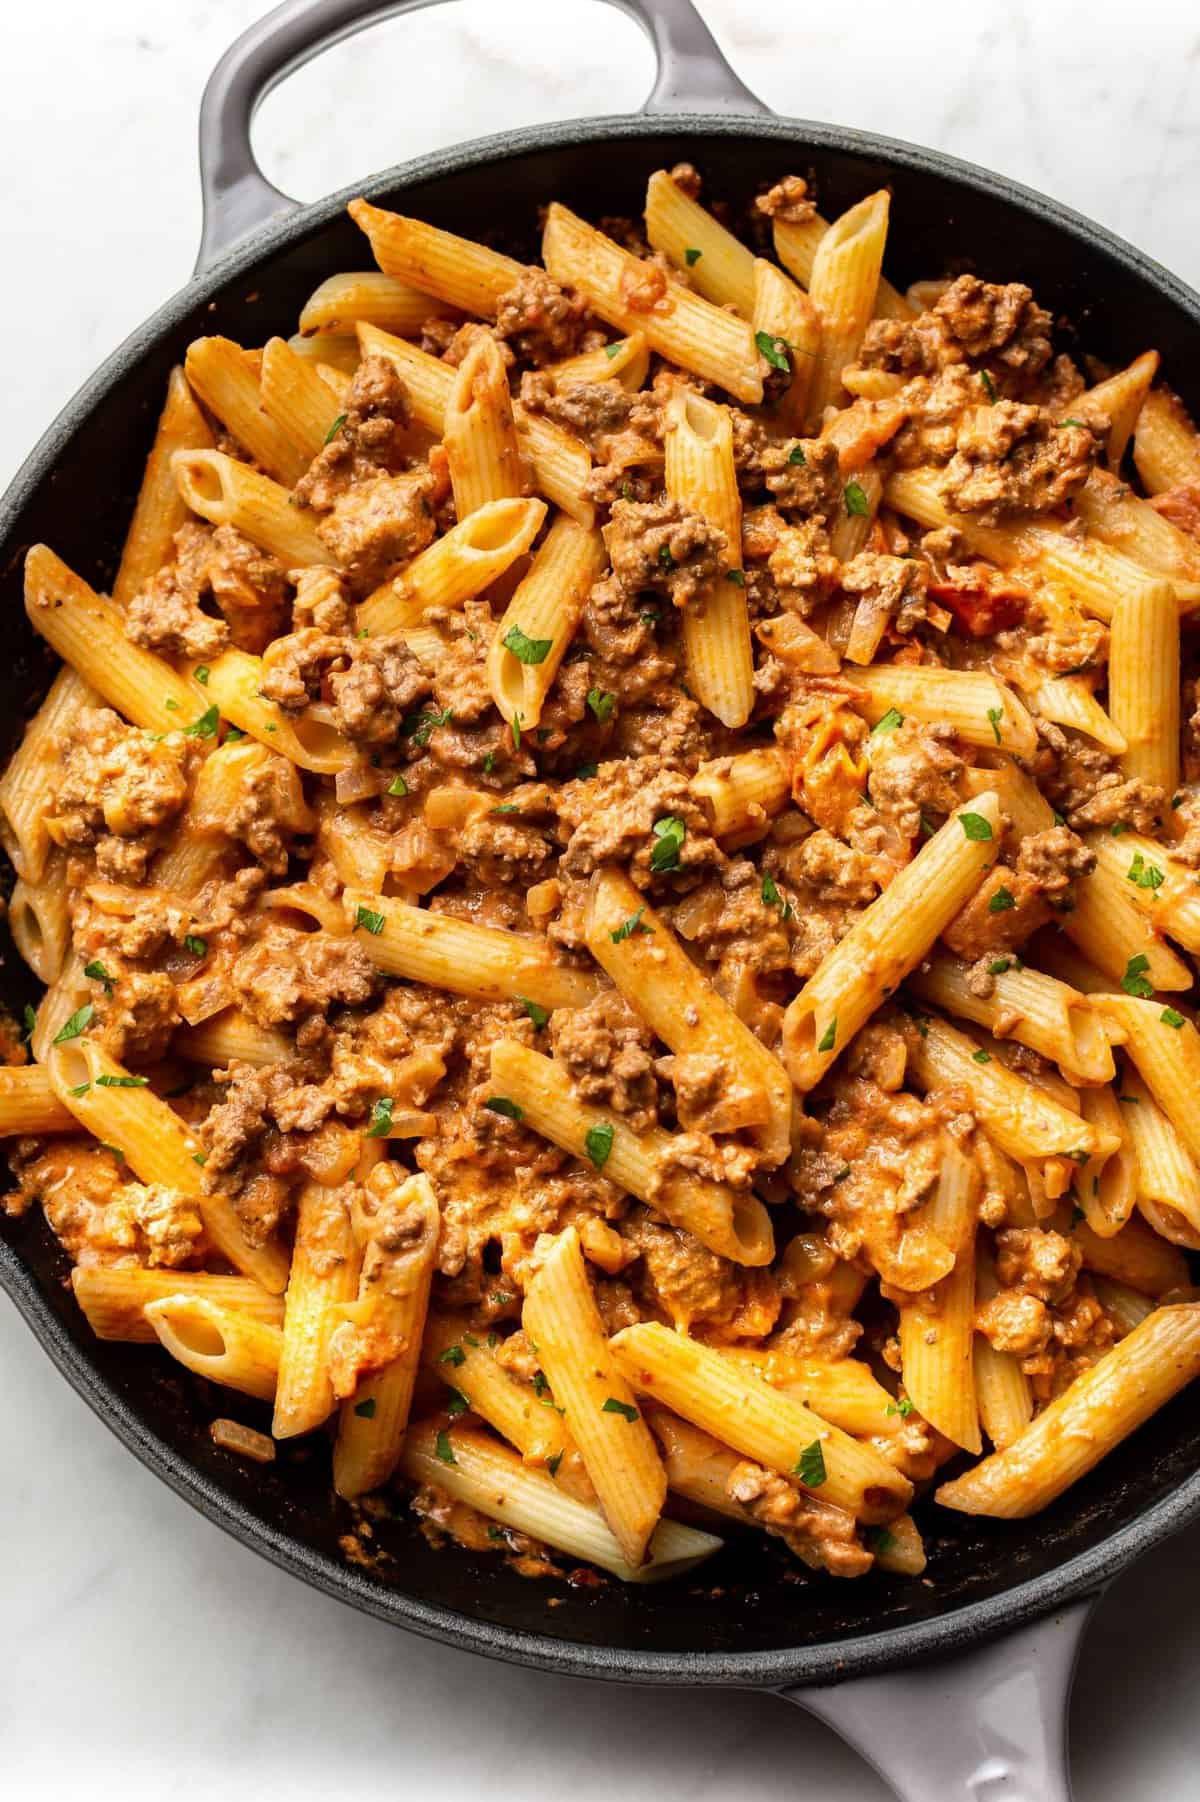 10 Delicious Pasta Recipes with Mince that Will Make Your Taste Buds Sing